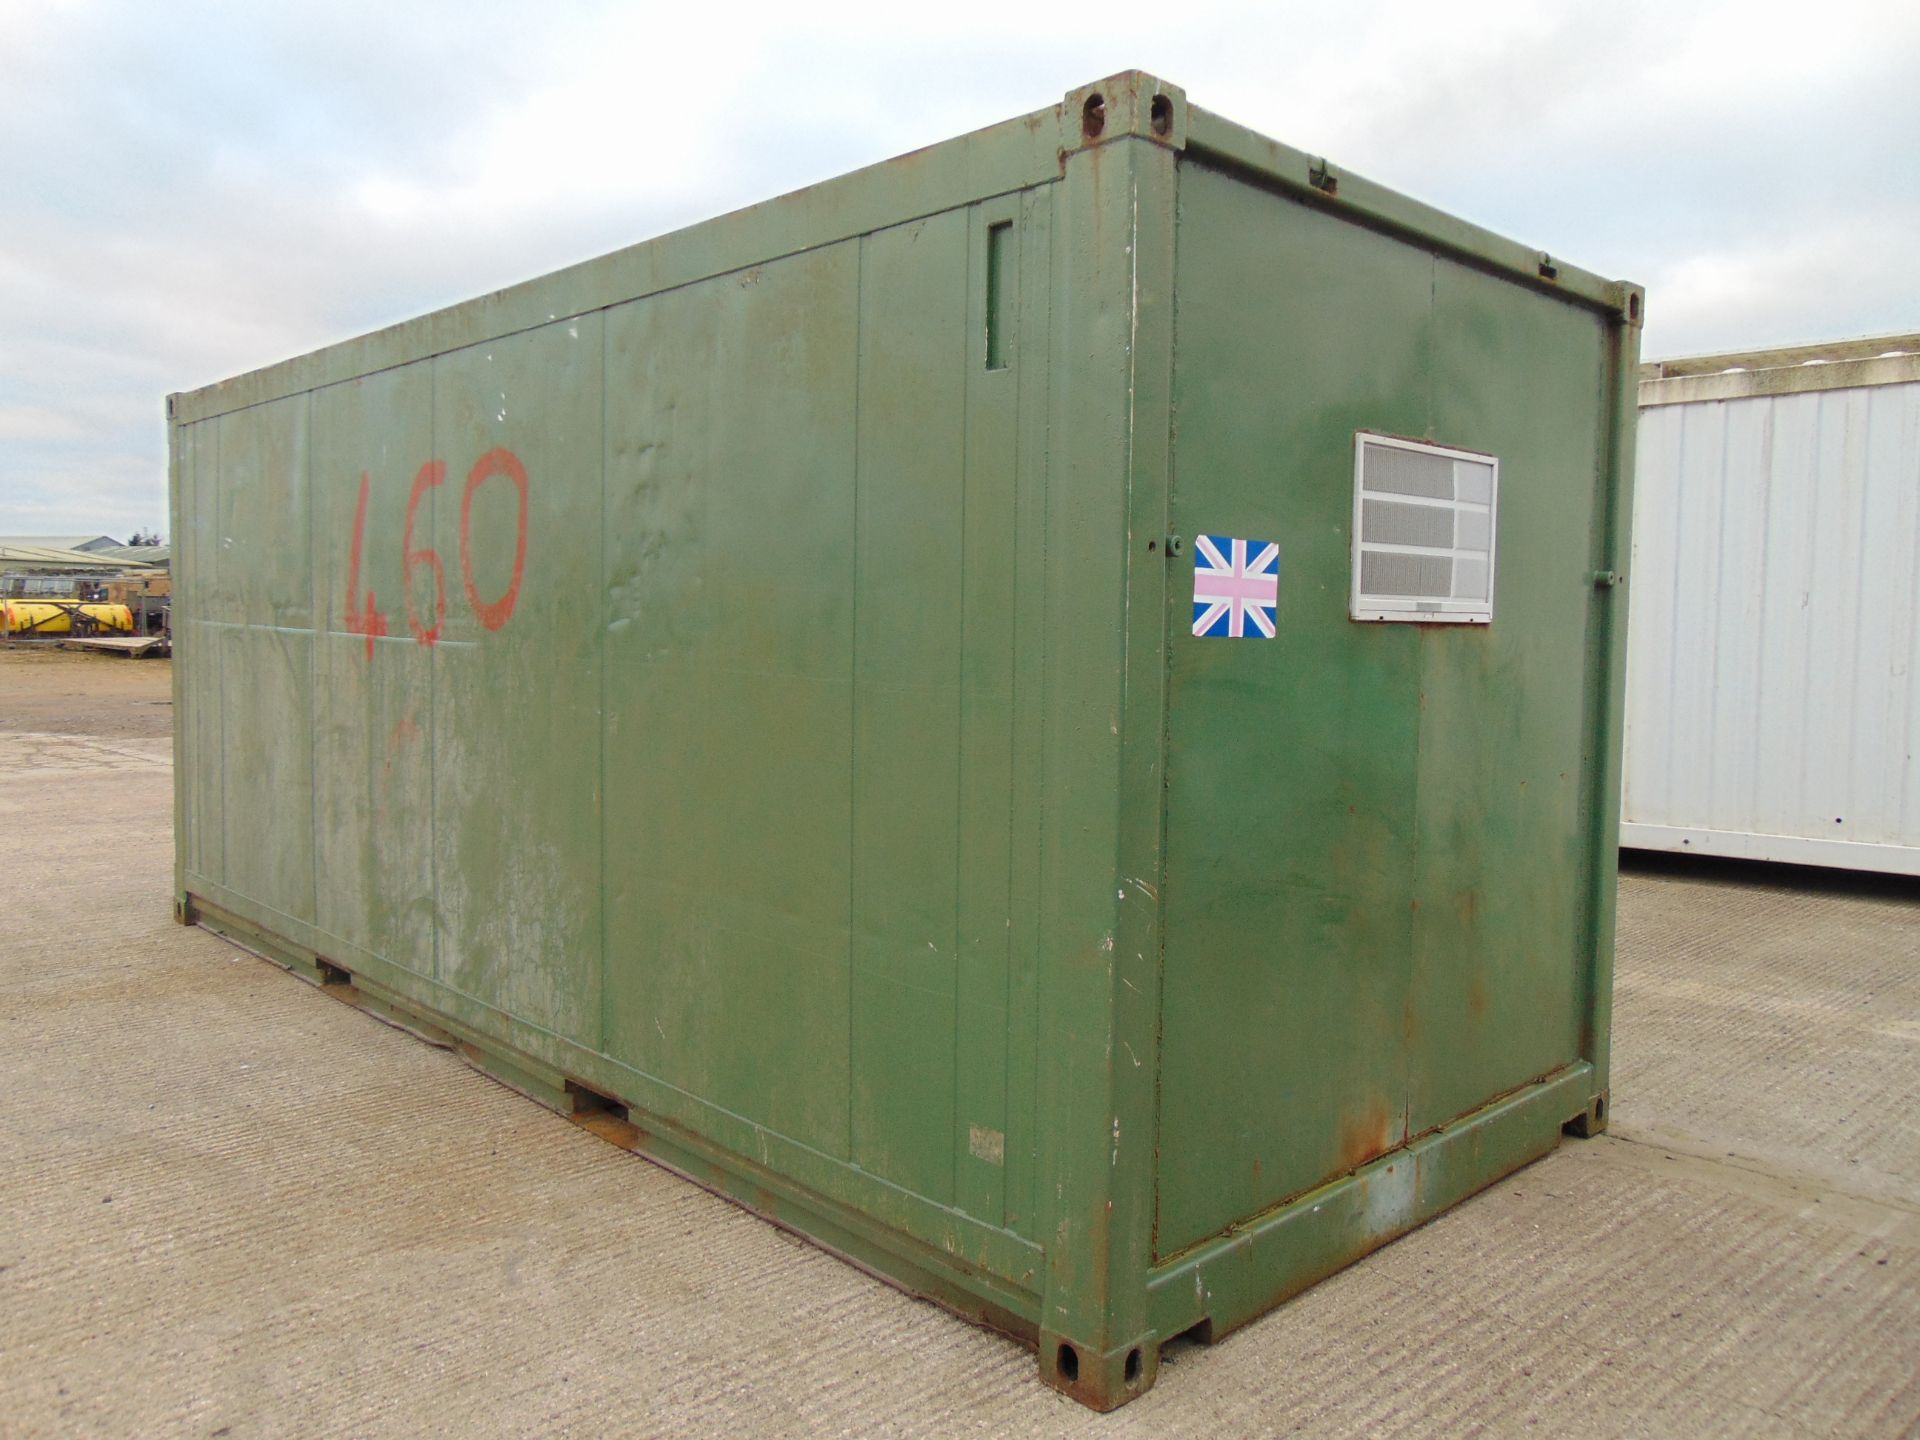 20' ISO Shipping Container C/W Stainless Steel Interior Lining, A/C, Roller Shutter Door etc - Image 18 of 18